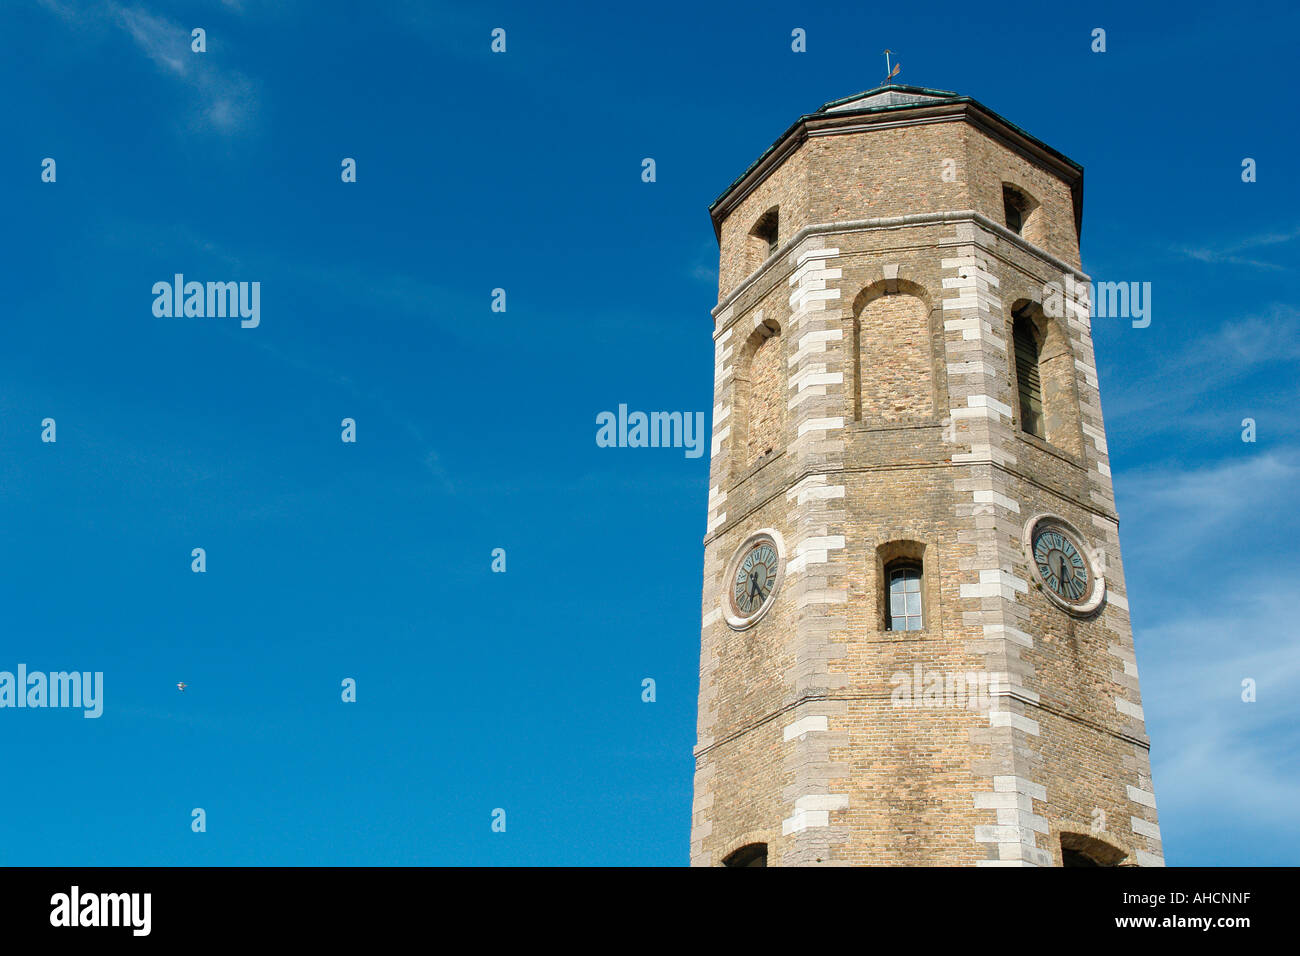 The Leughenaer (the Tower of the Lying) at Dunkirk (Dunkerque-Flanders-France) Stock Photo